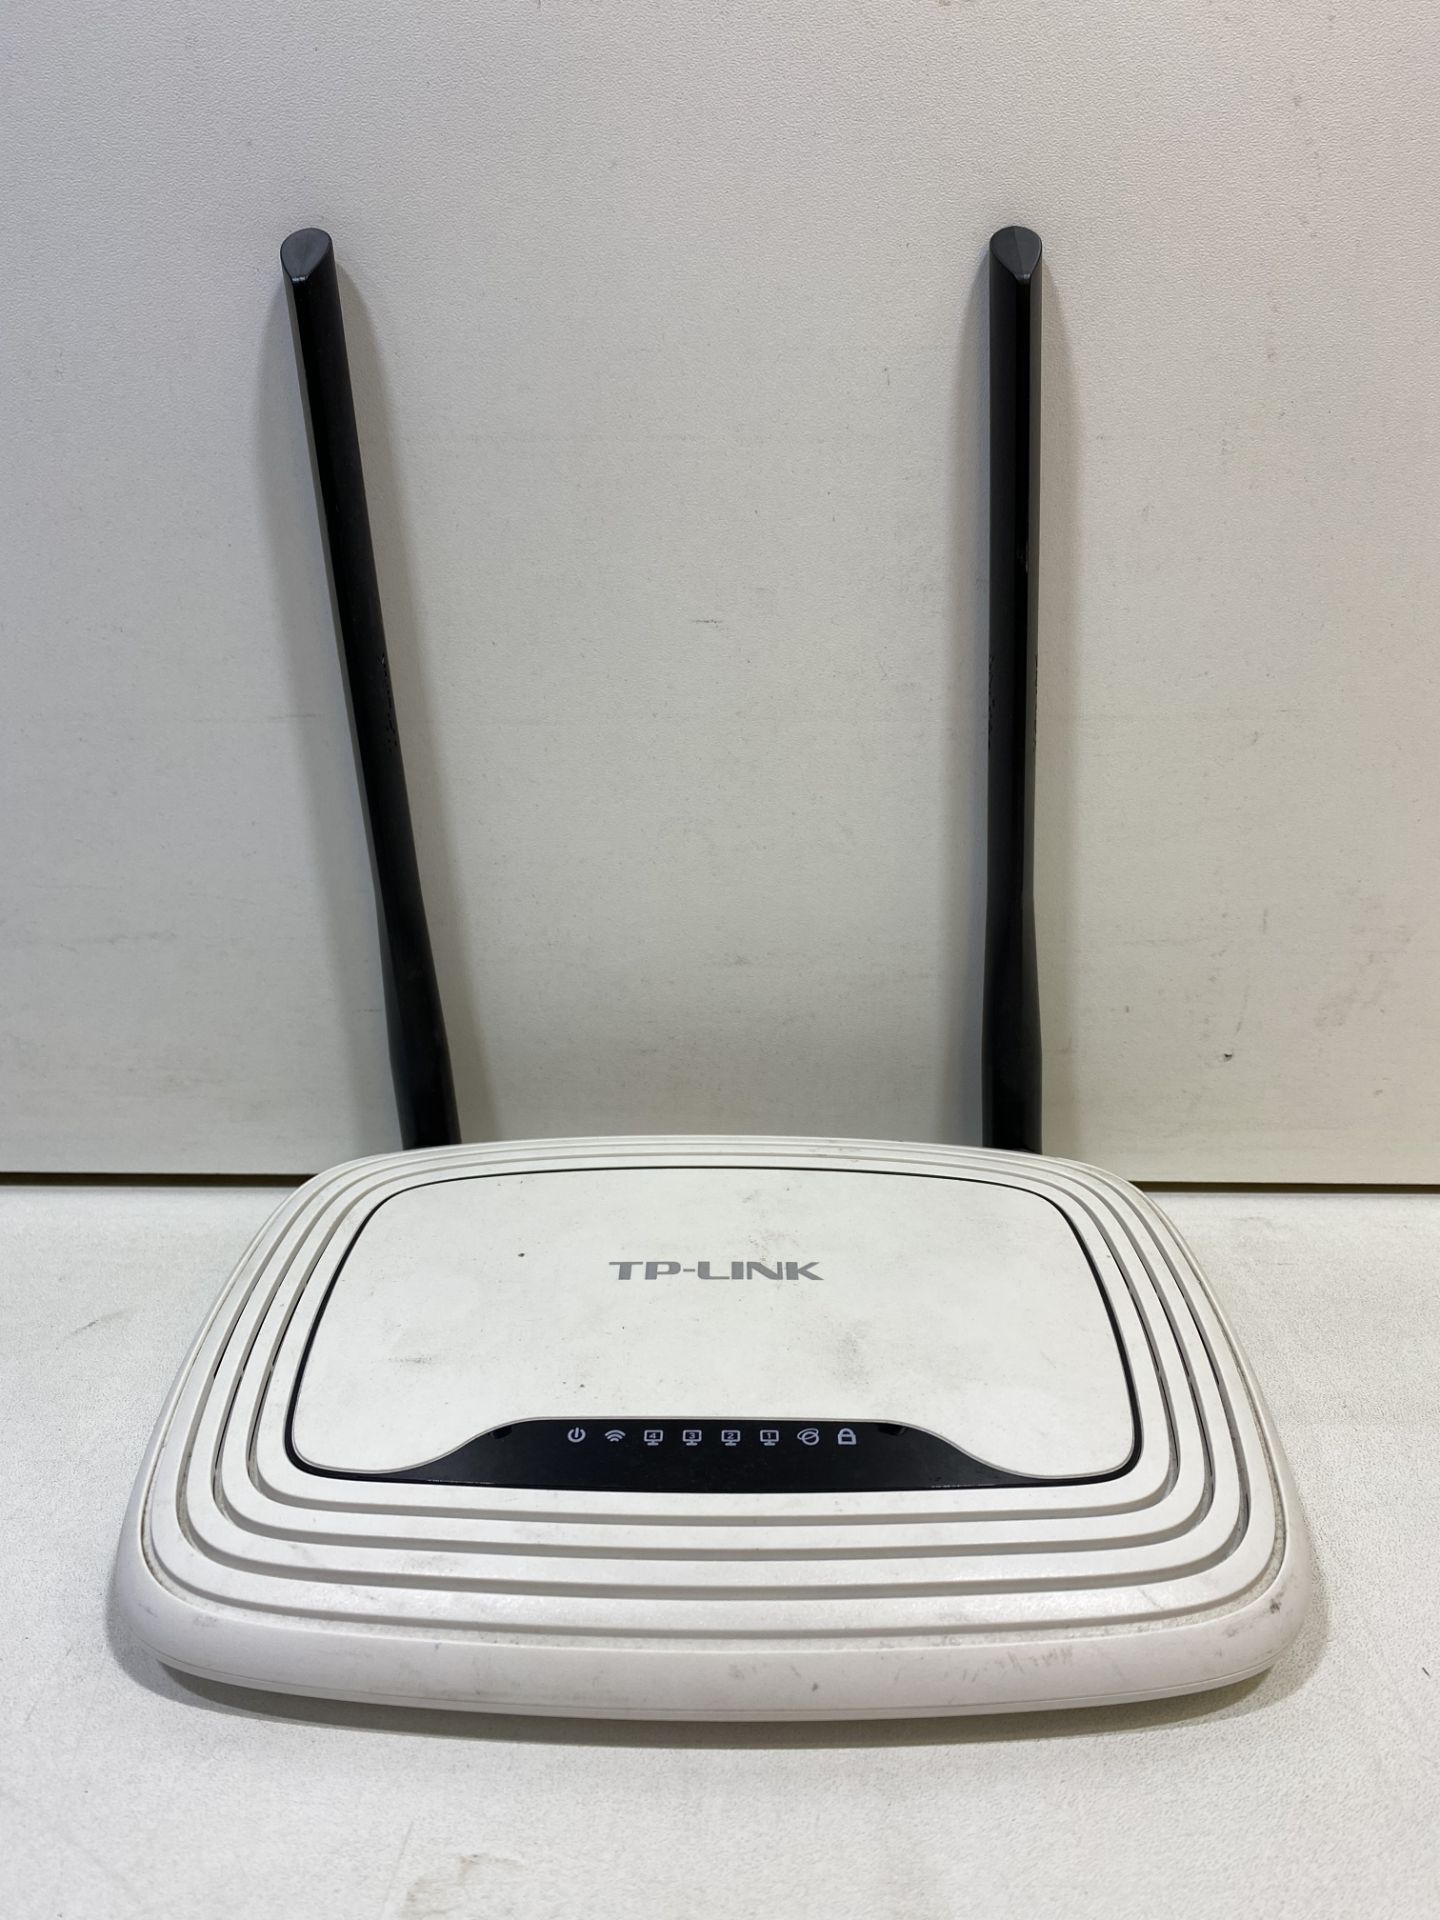 TP-Link TL-WR841N Wireless Router - Image 2 of 5